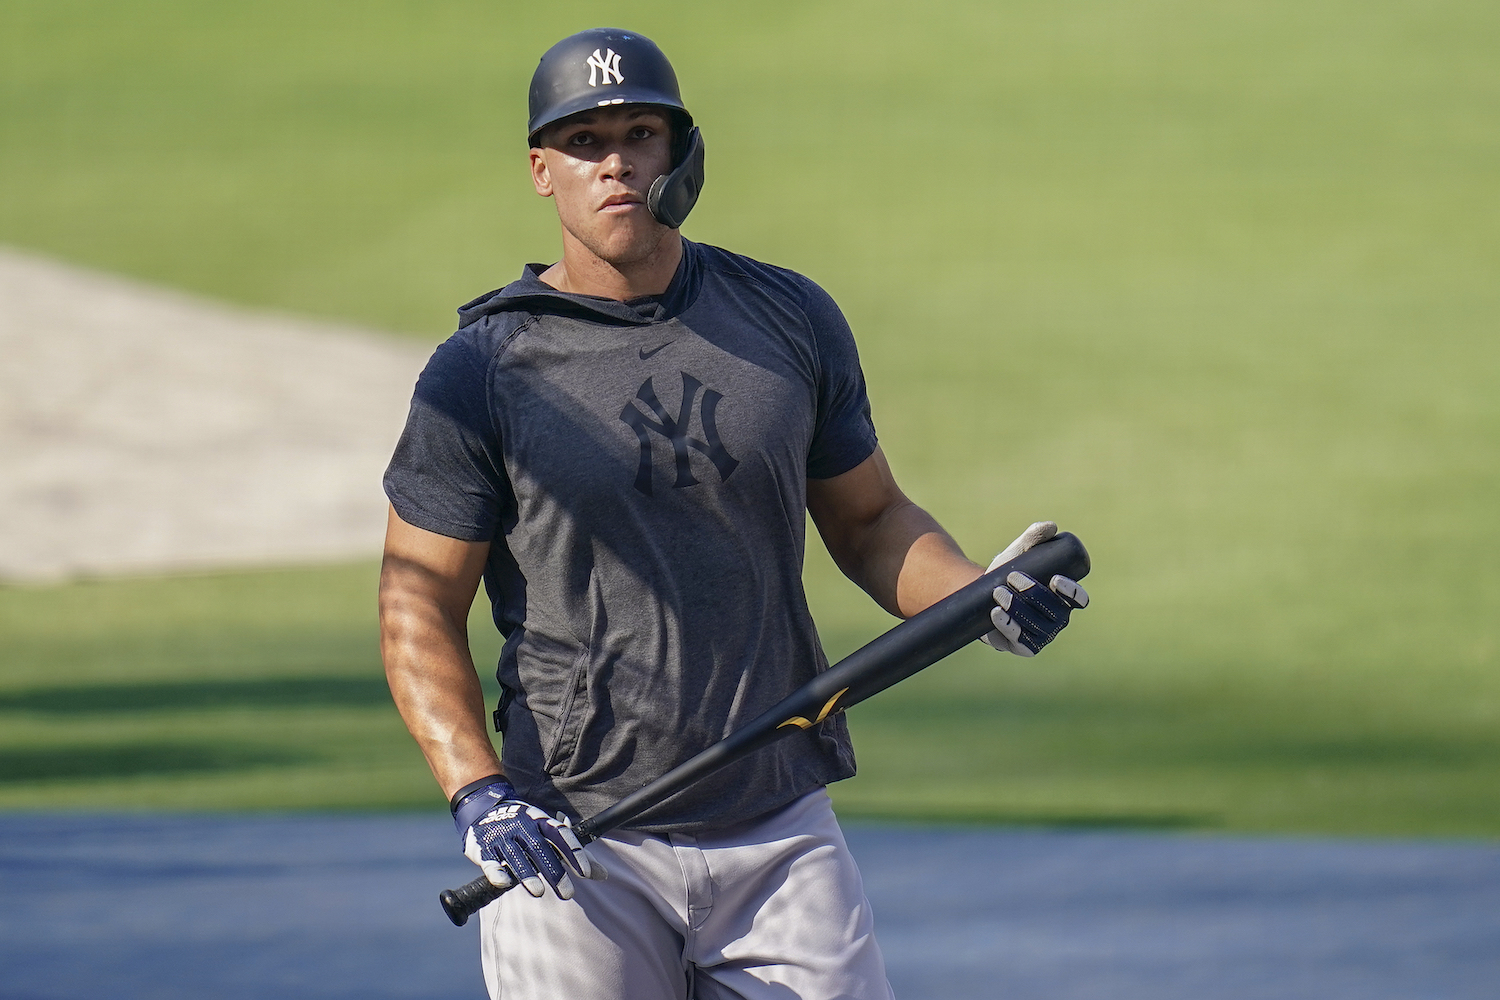 WATCH: Yankees' Aaron Judge hammers home runs in 1st workout of